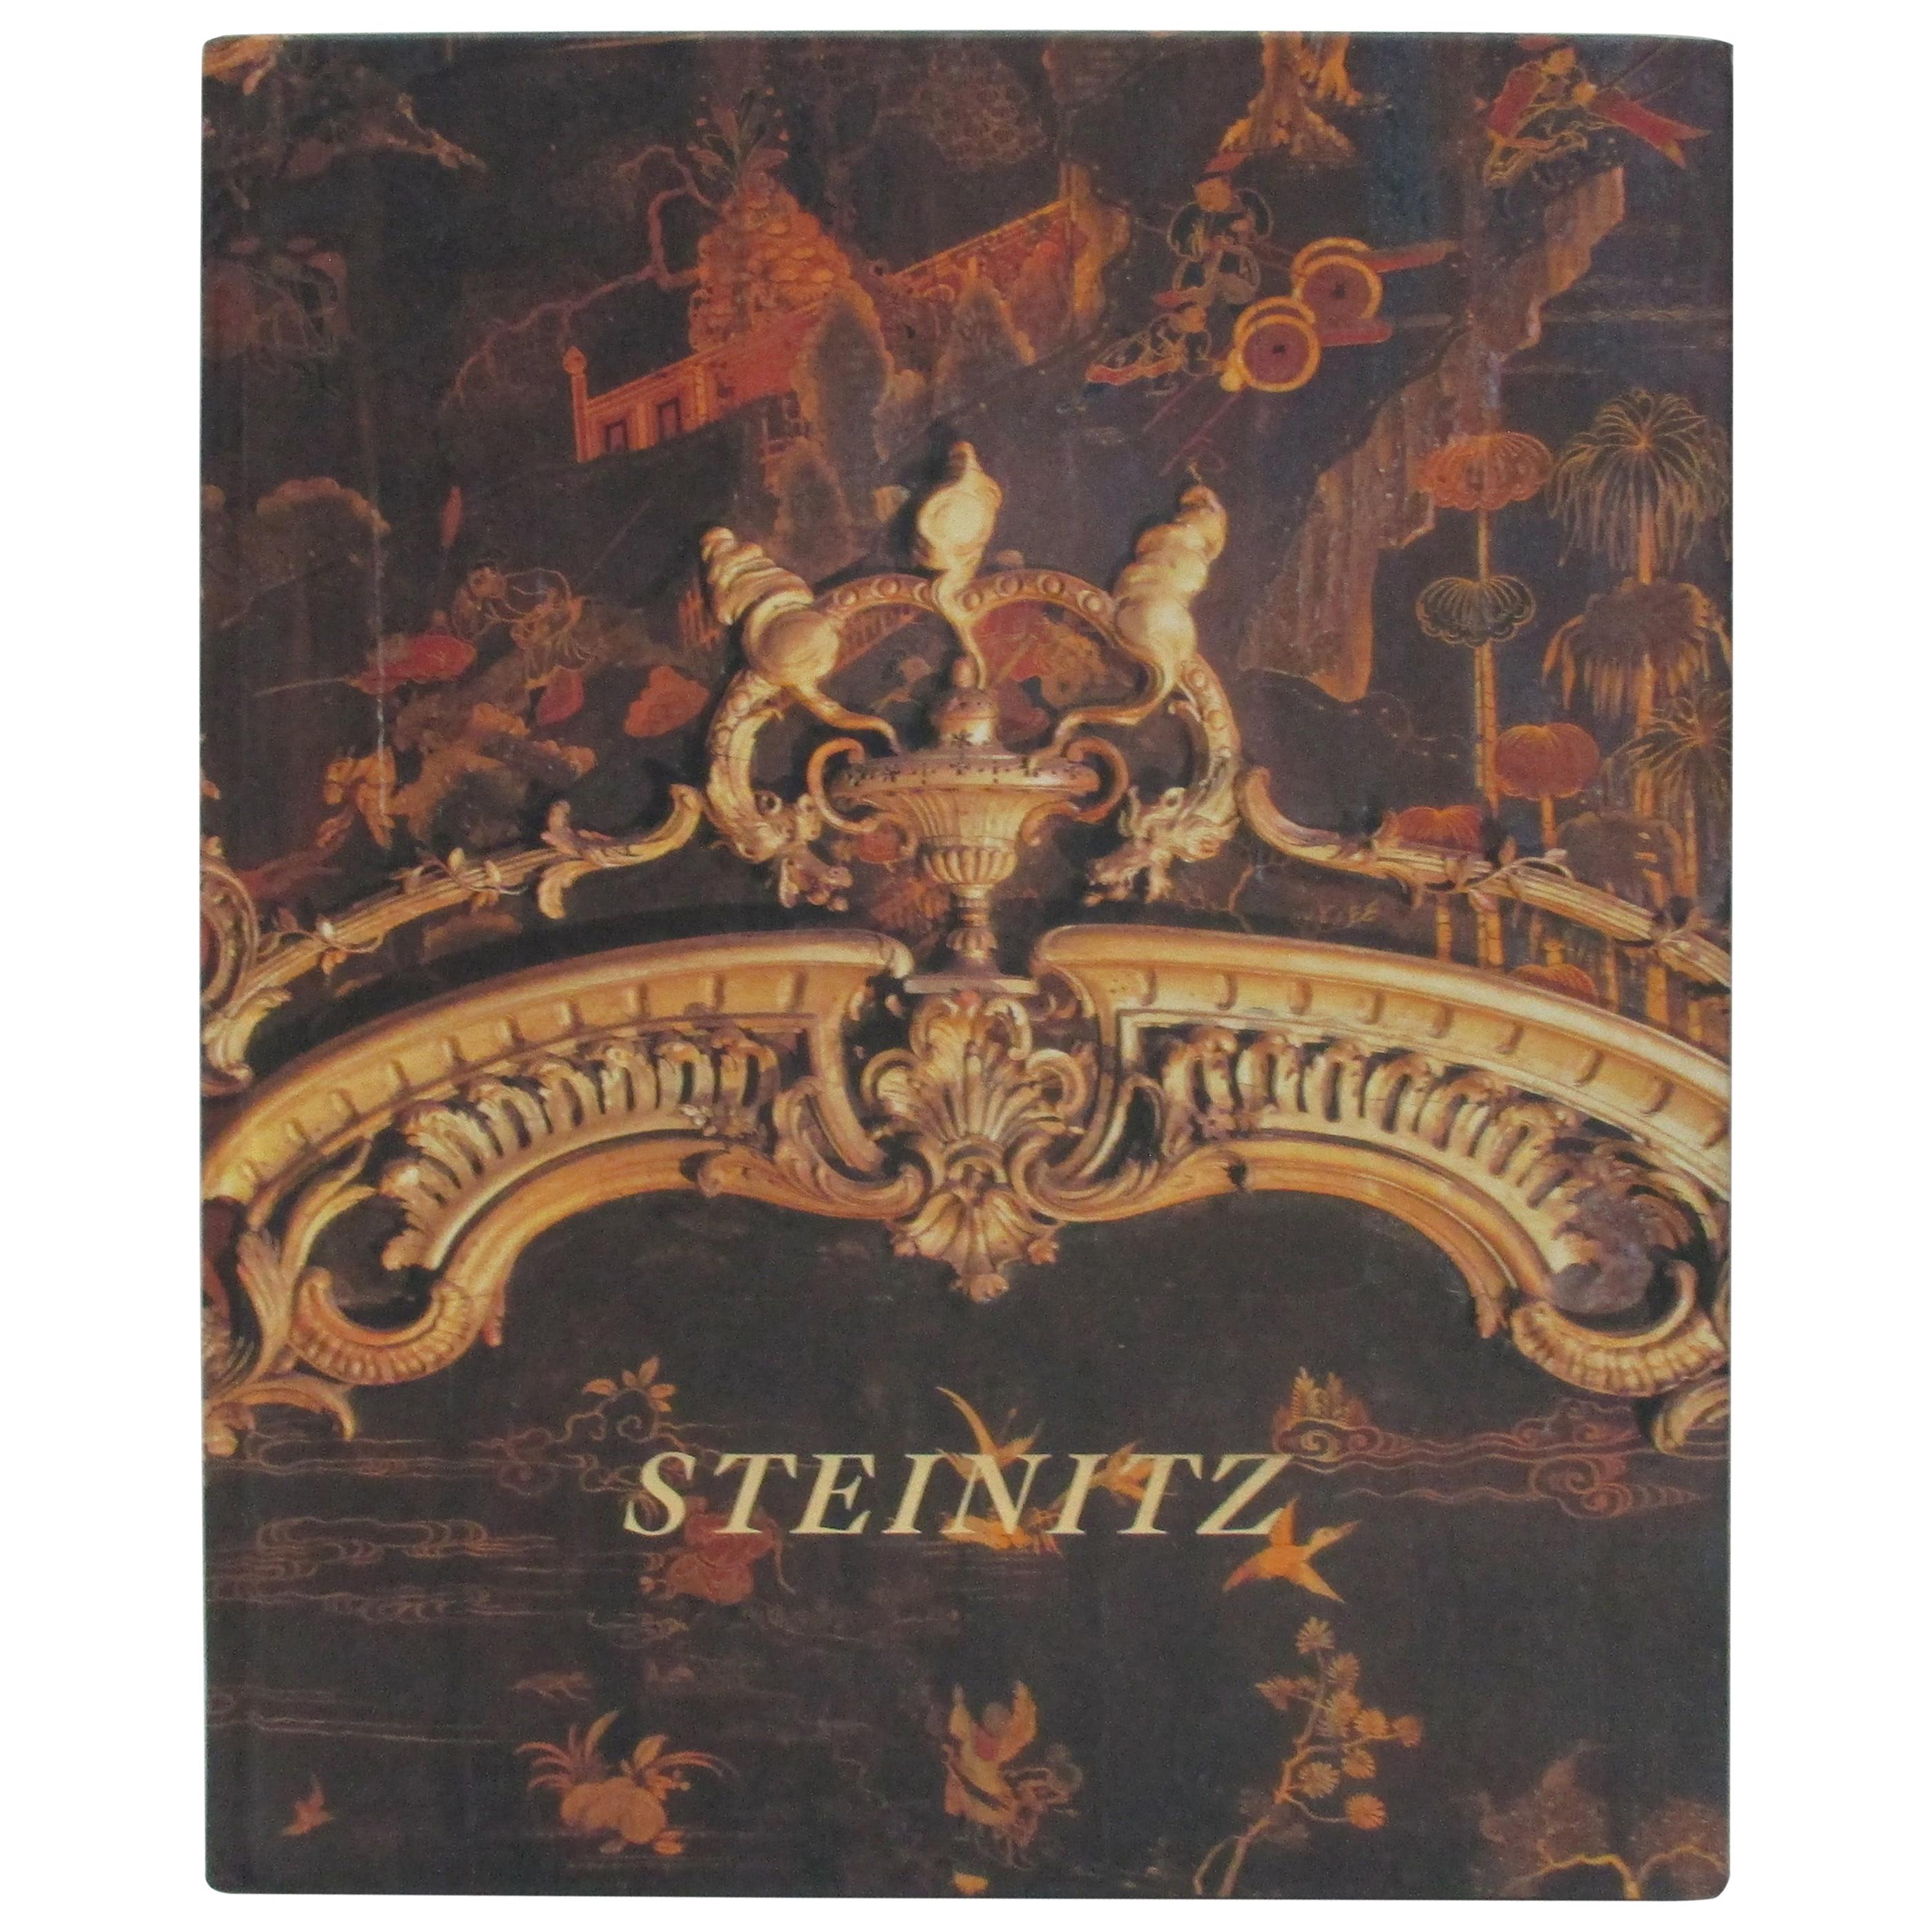 Steinizt Catalogue in French